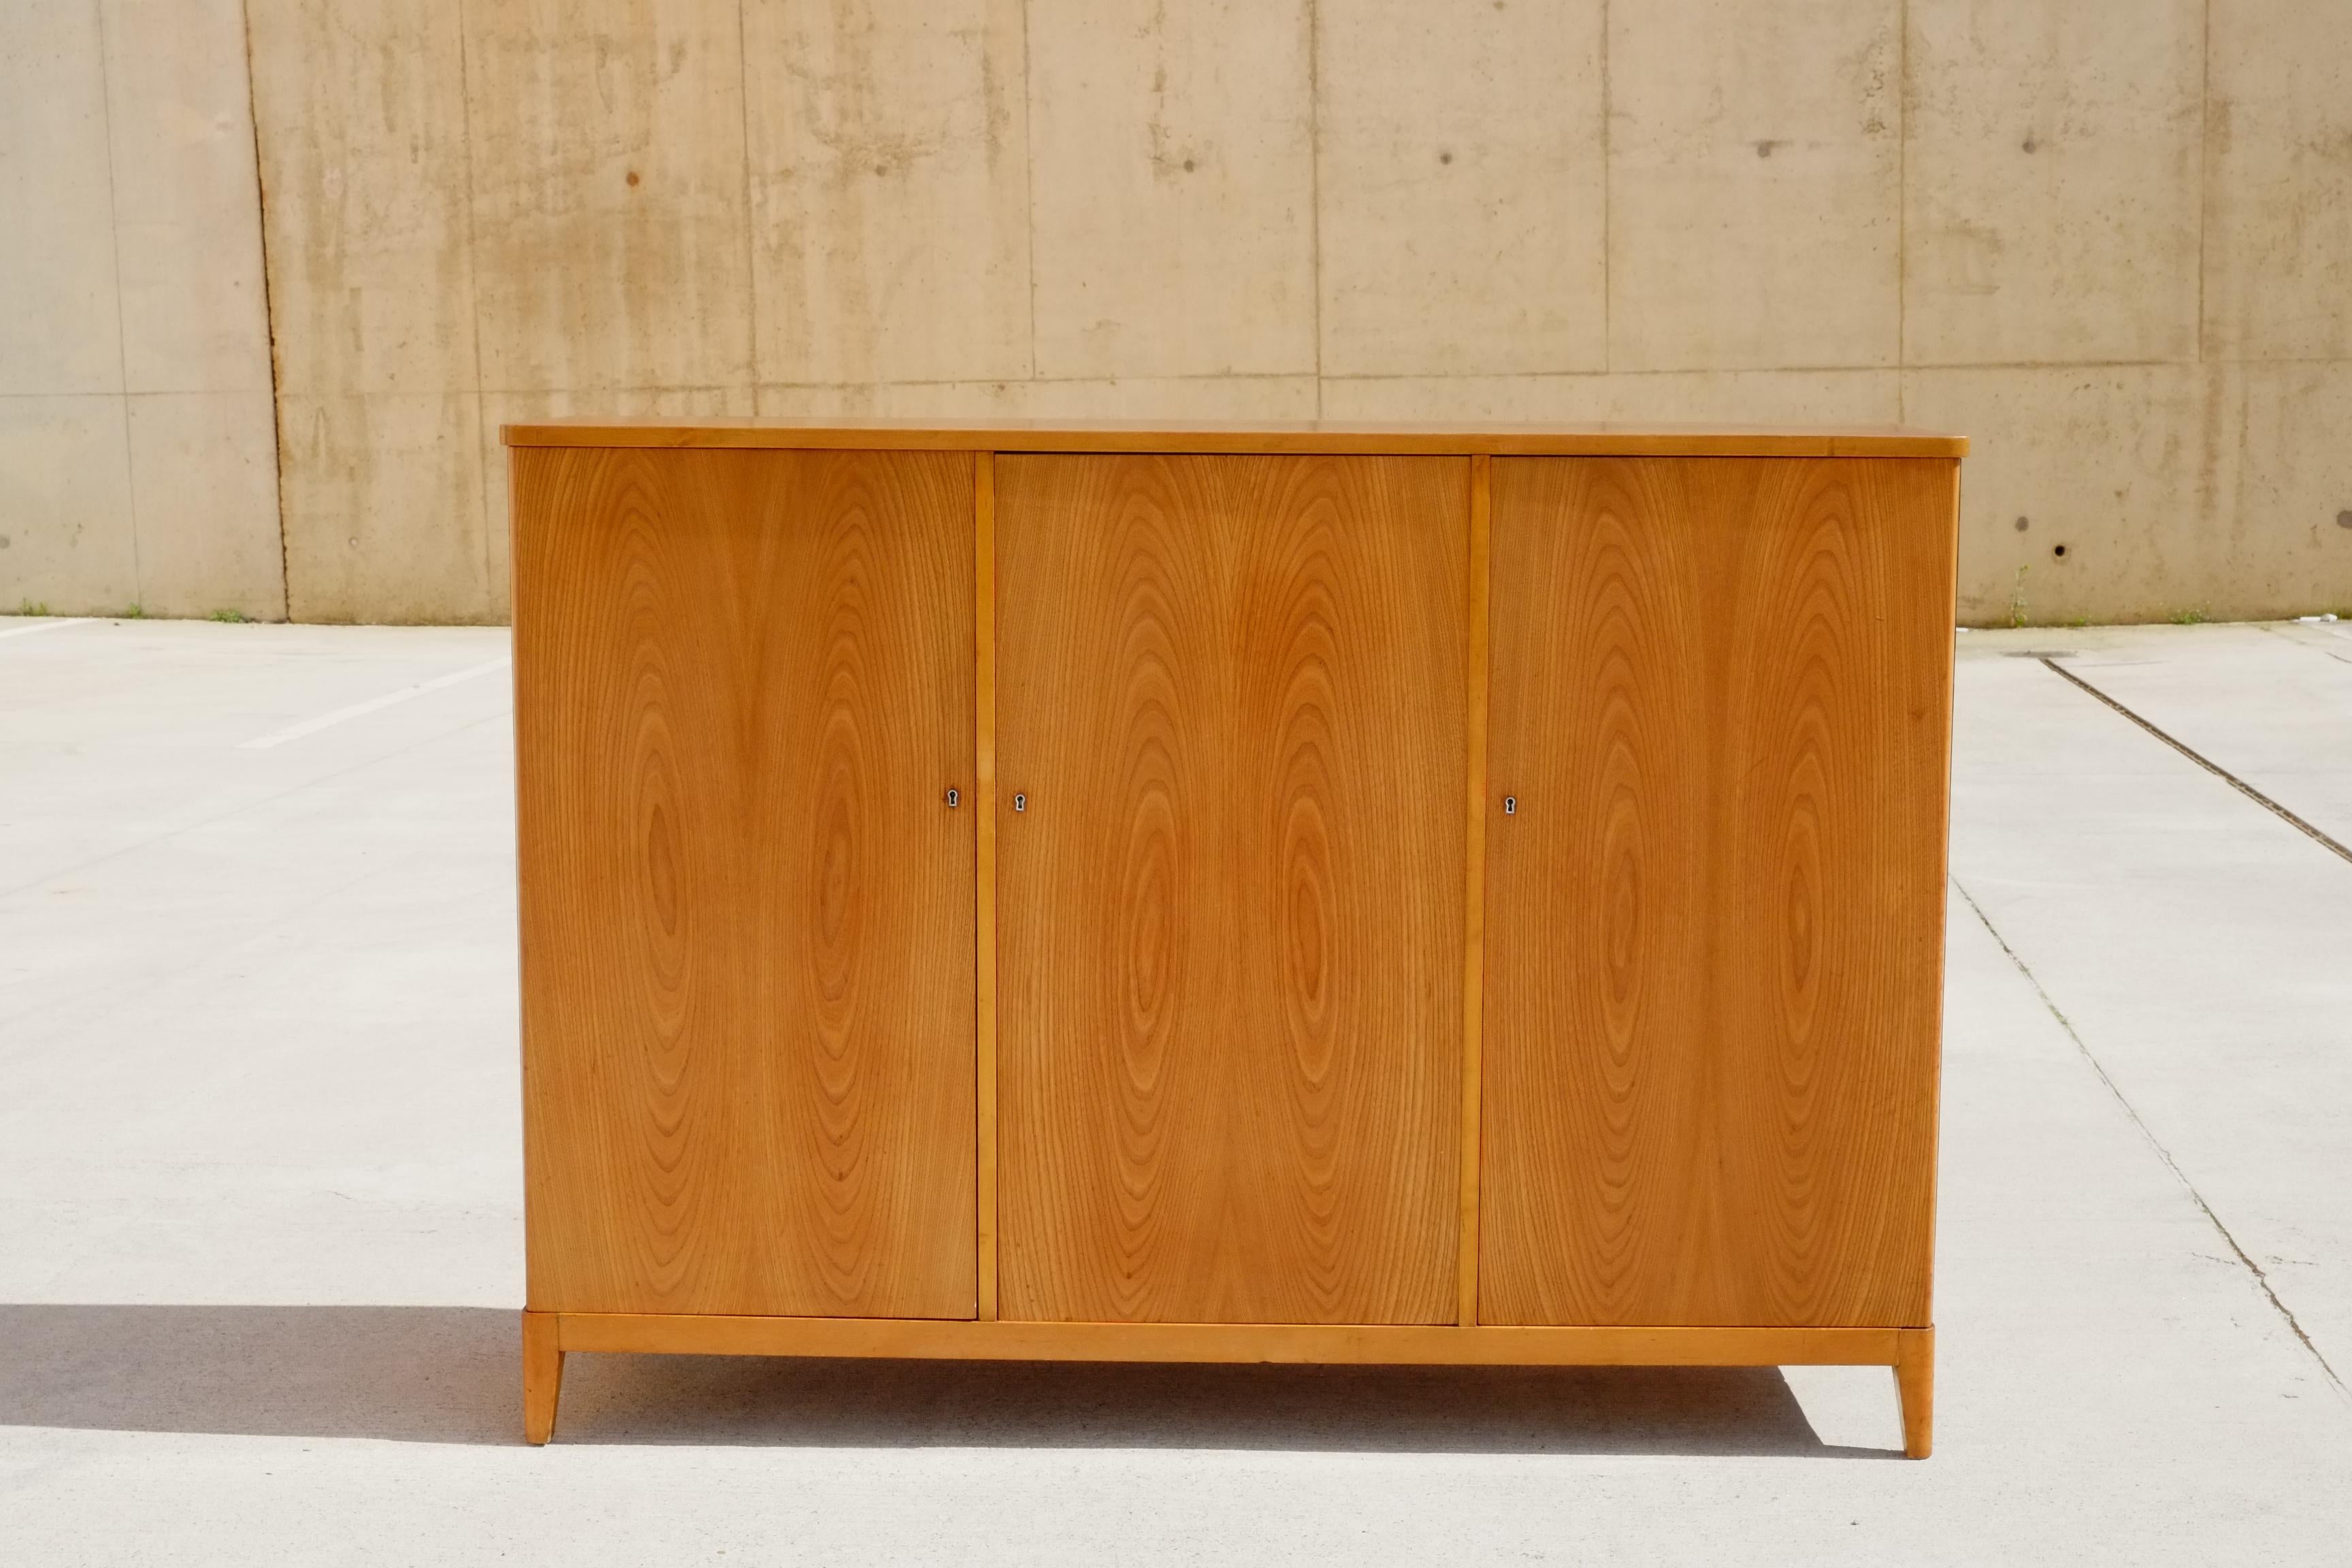 A beautiful 1950s Art Deco sideboard by Carlsson & Reicke, Stockholm. This sideboard has three tall doors in a beautiful honey coloured, book matched elm wood. The interior is a lovely contrasting pale birch wood with two shelved areas to the left